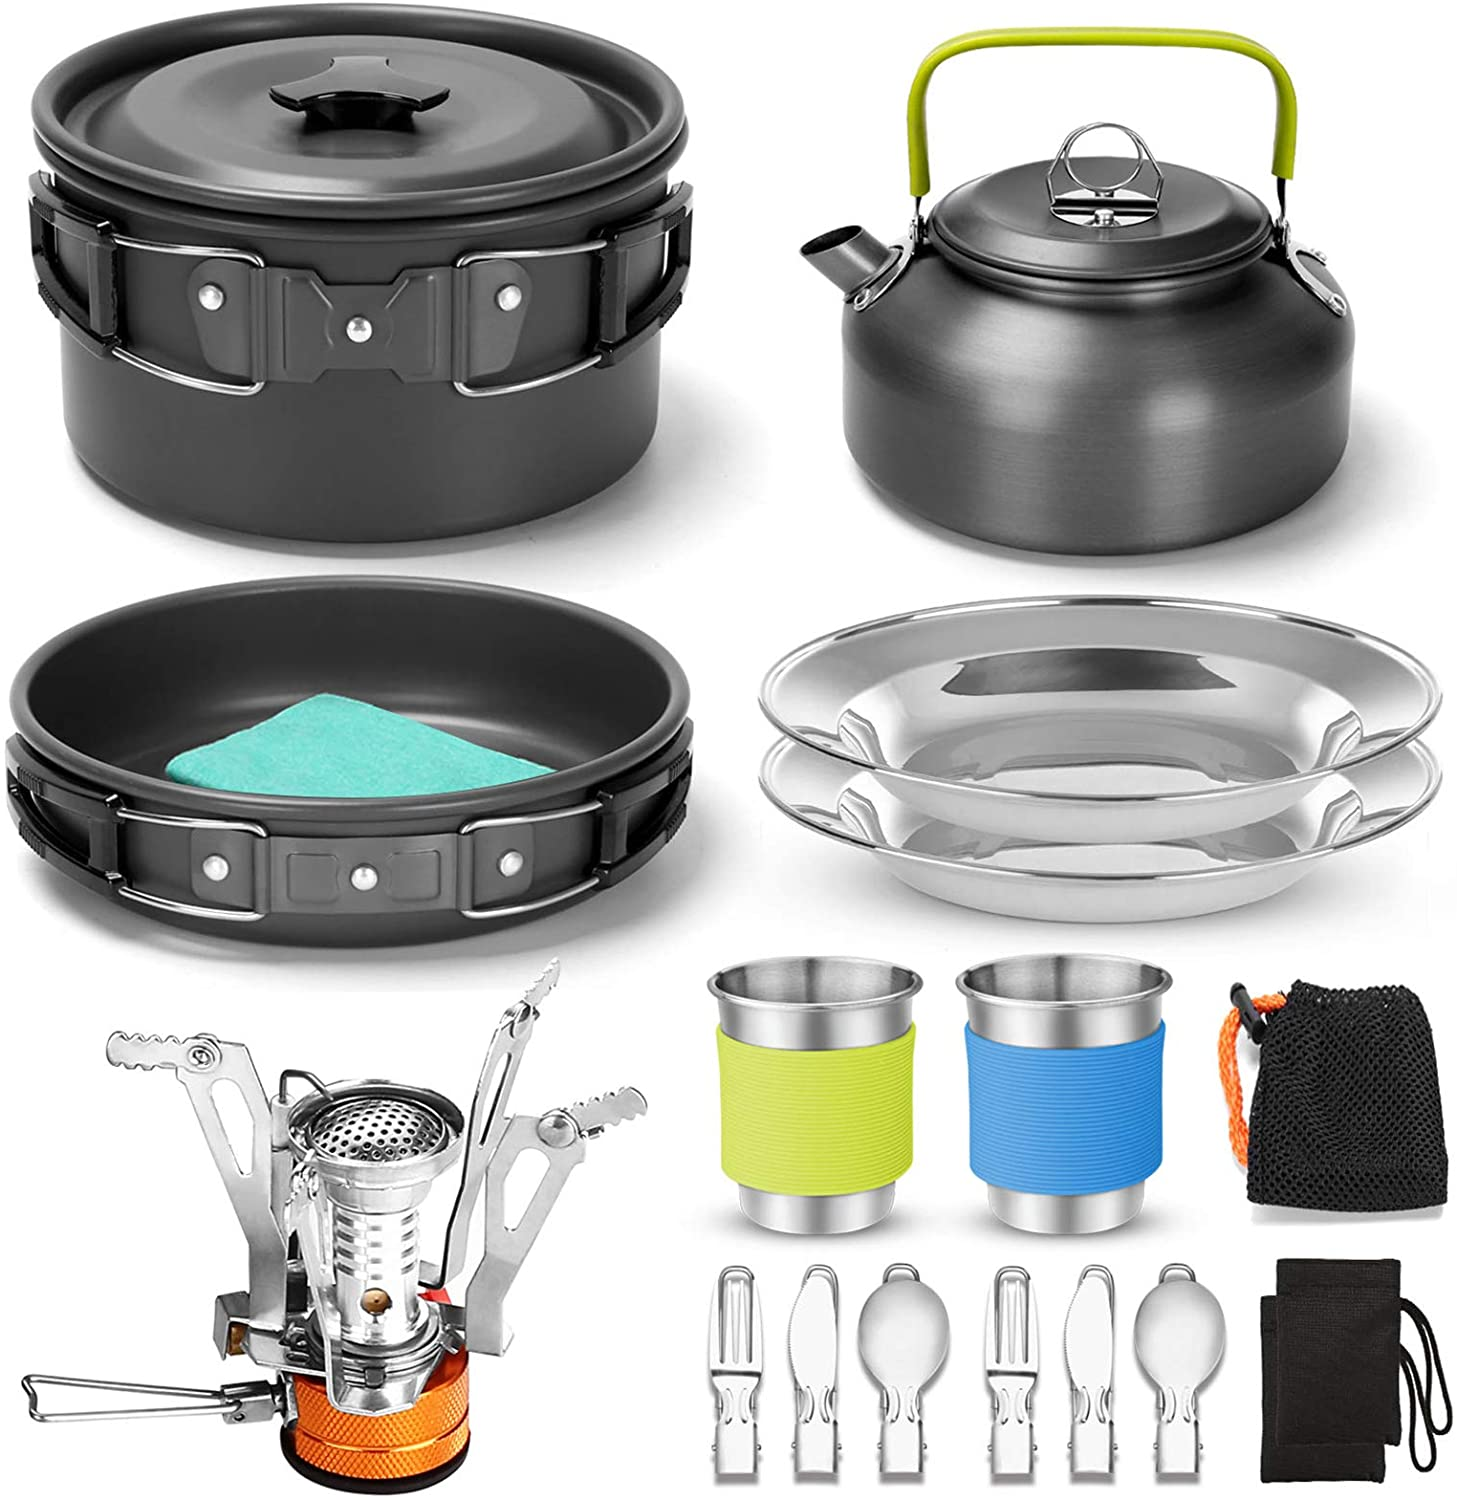 Extremus 13 Pcs Camp Kitchen Cooking Utensil Set Cookware Kit - Travel  Organizer Grill Accessories Portable Compact Gear for Backpacking BBQ  Camping